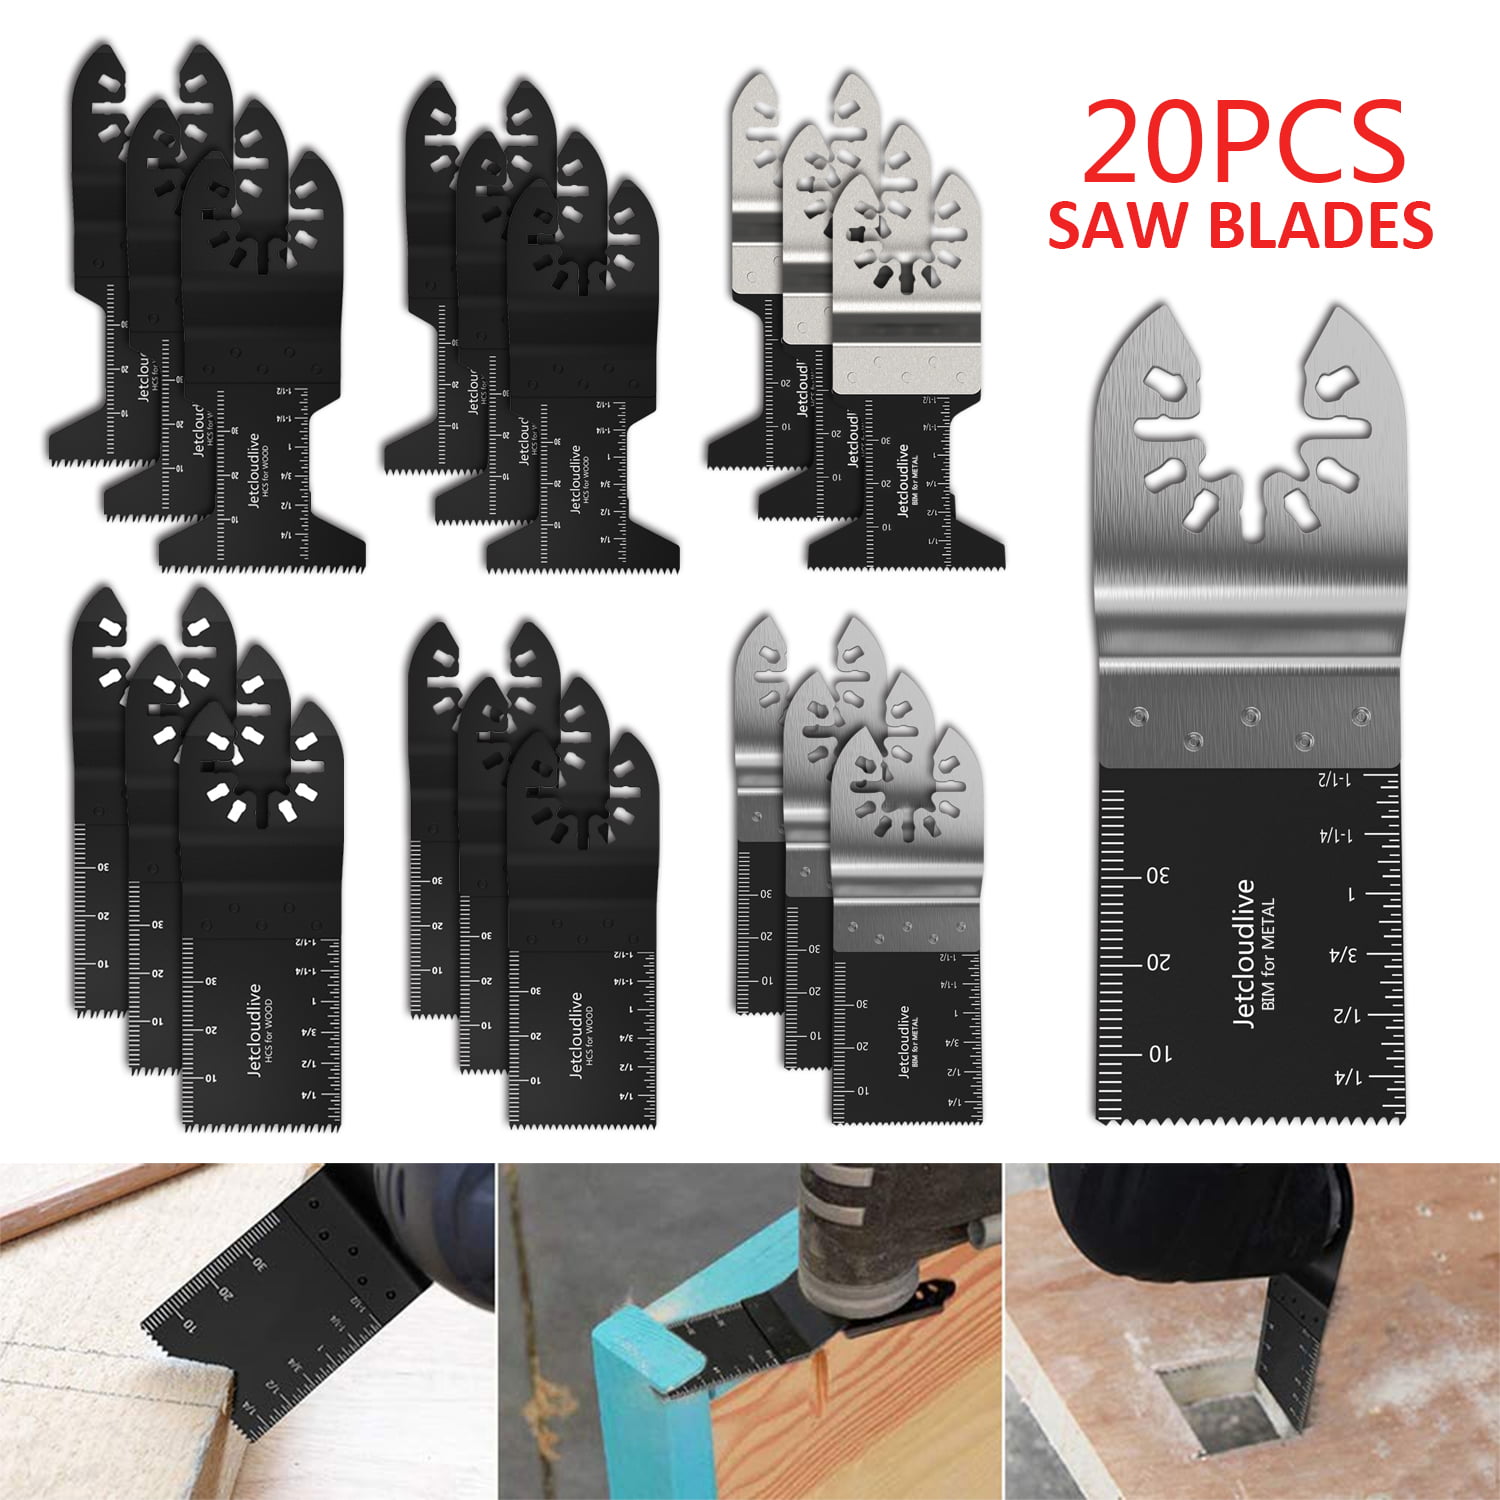 20pcs Metal Wood Oscillating Saw Blades Cutter Kit For Woodworking Cutting Tools 